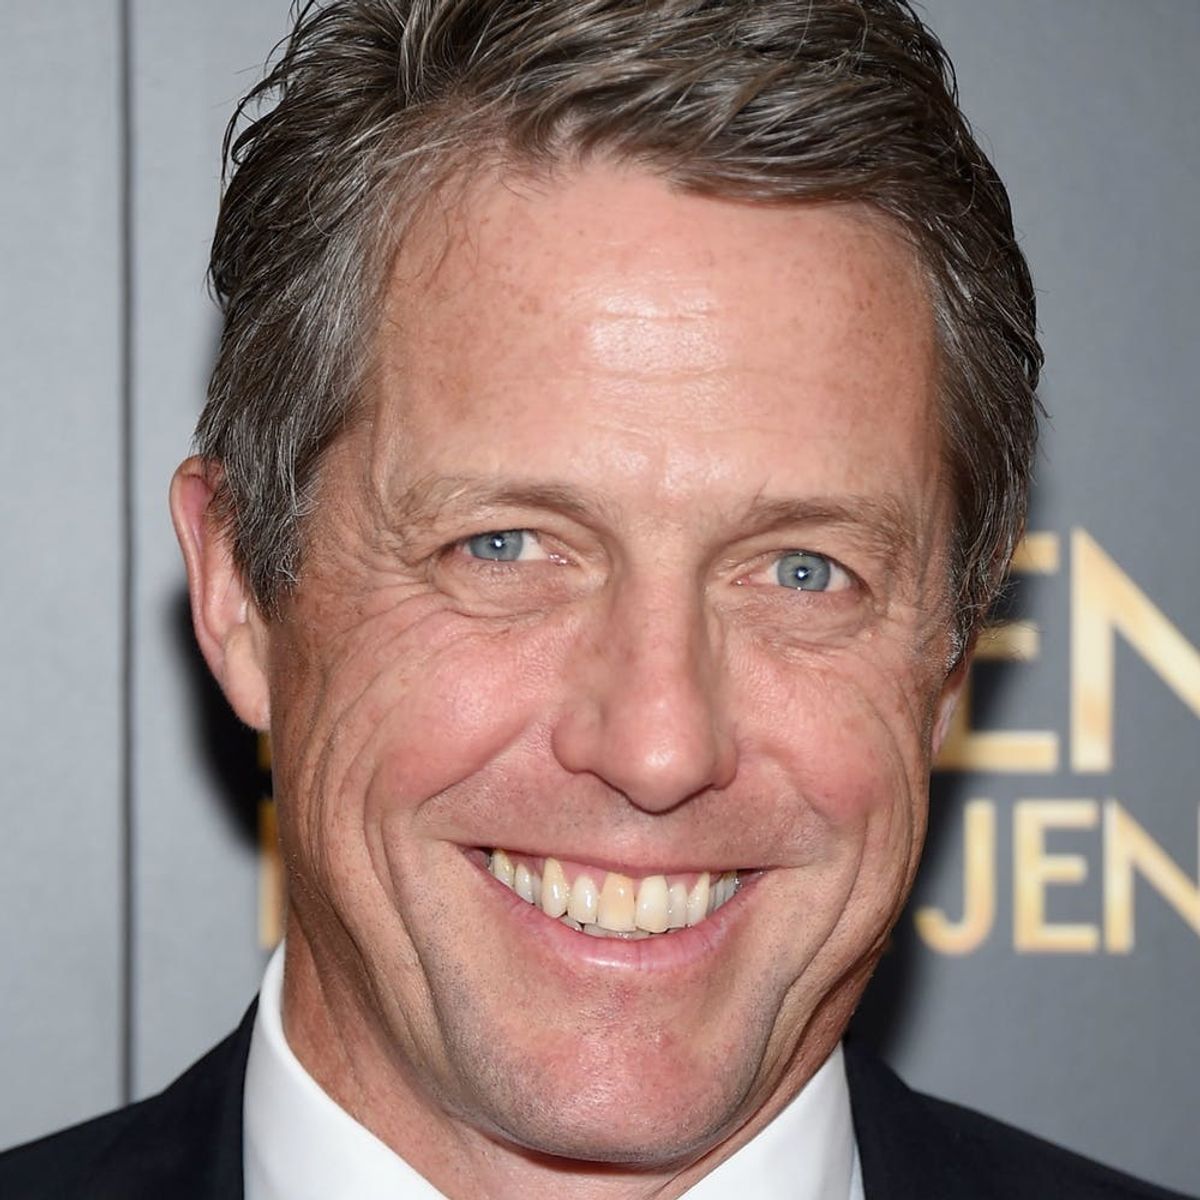 You Won’t Believe the Epic Diss Hugh Grant Just Gave His Former Female Co-Stars